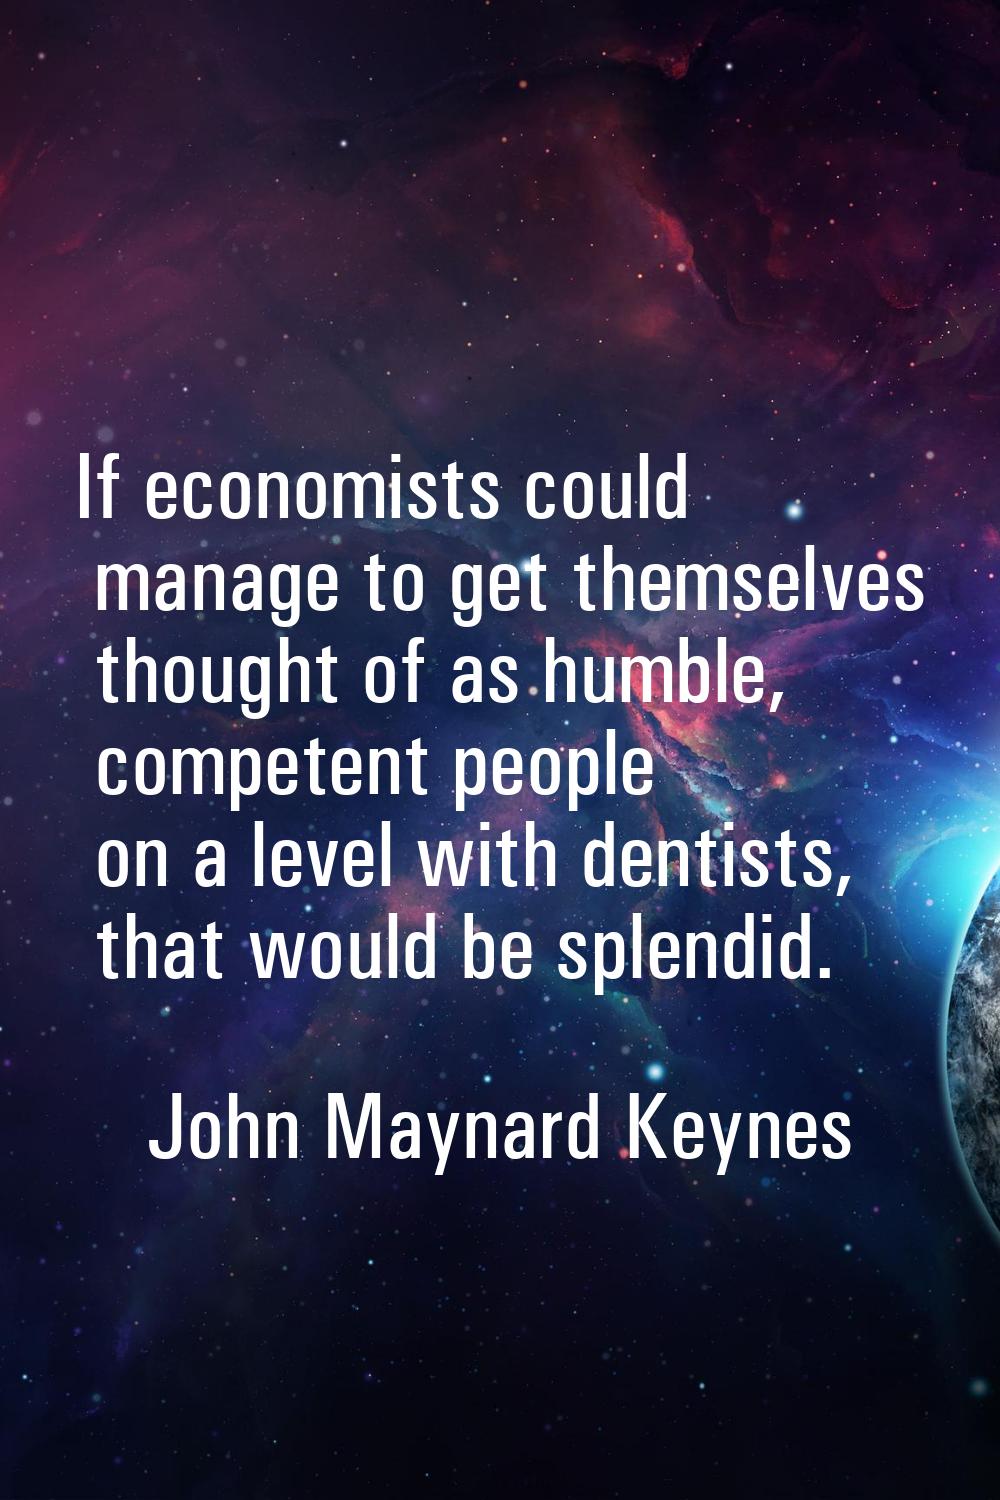 If economists could manage to get themselves thought of as humble, competent people on a level with